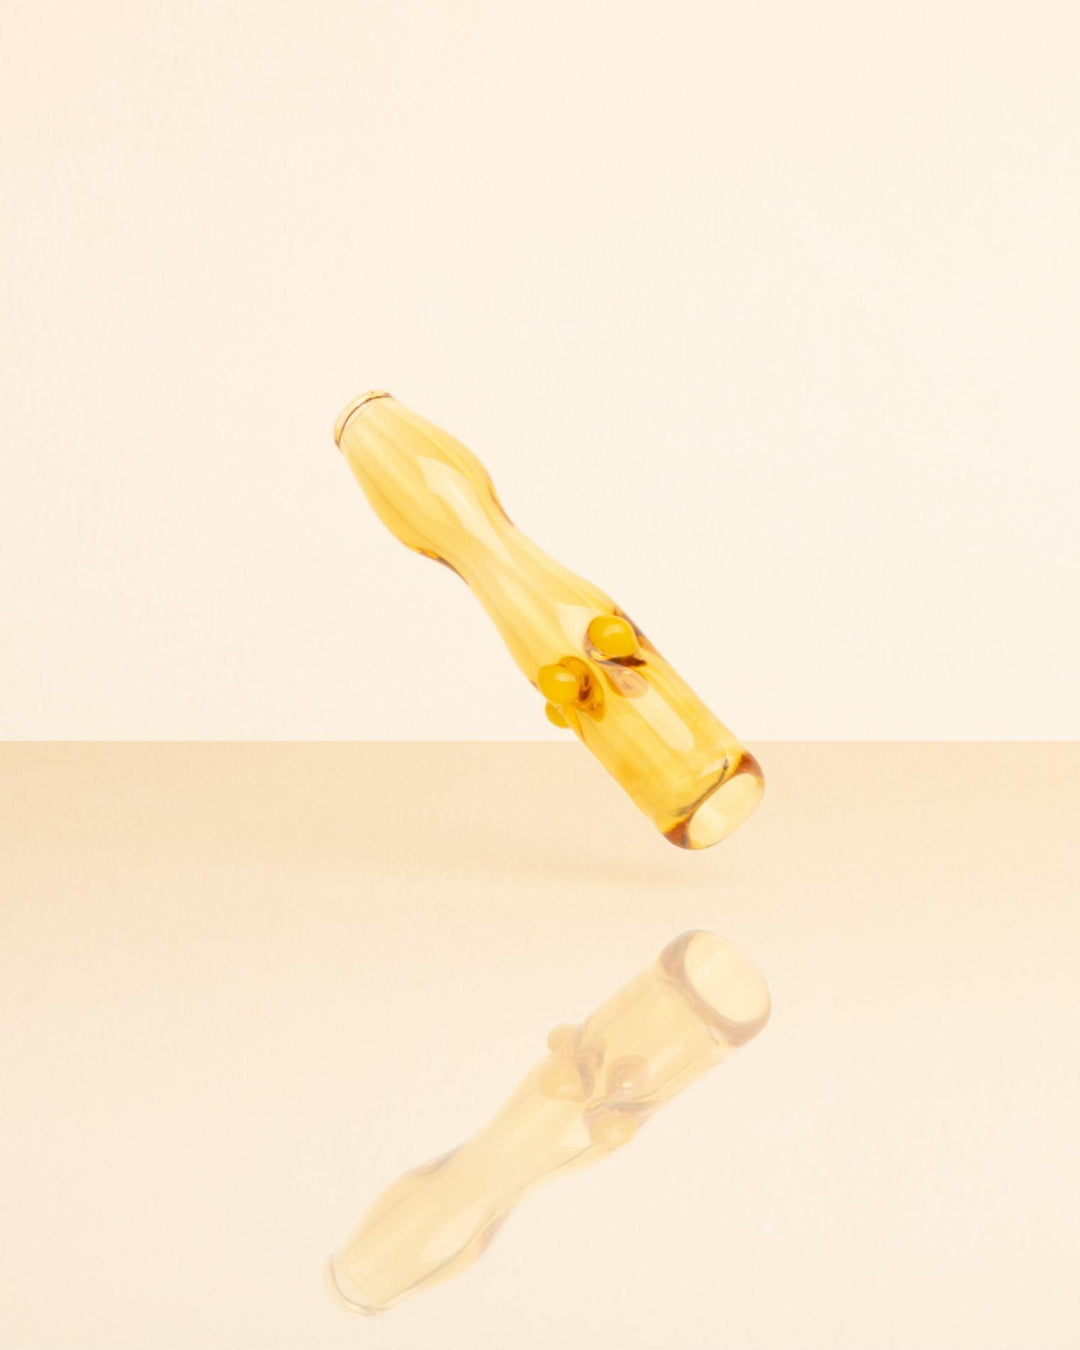 Glass Joint Holder in Marigold Yellow by House of Puff. 